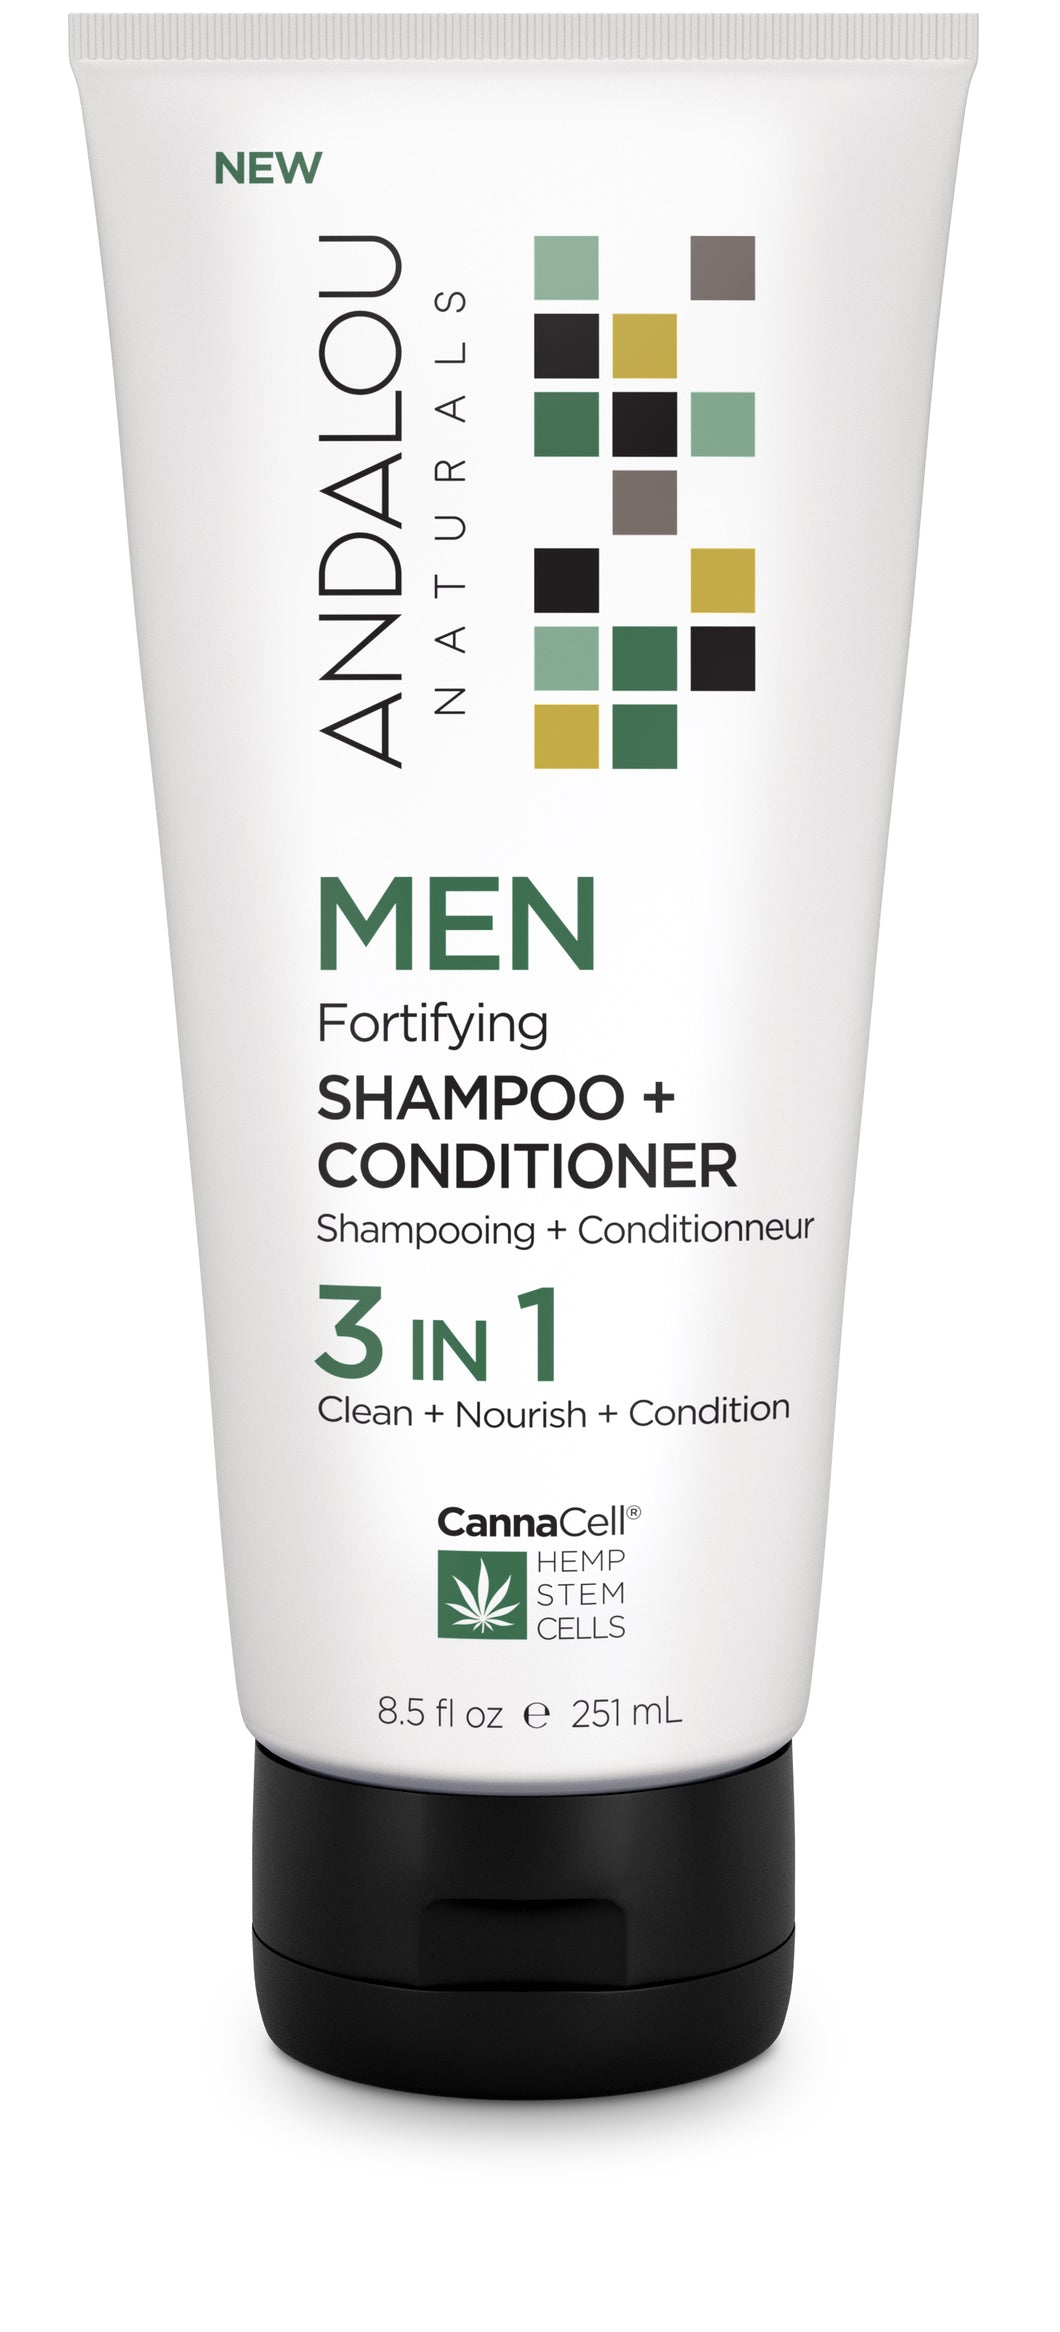 MEN Fortifying Shampoo + Conditioner 3 IN 1